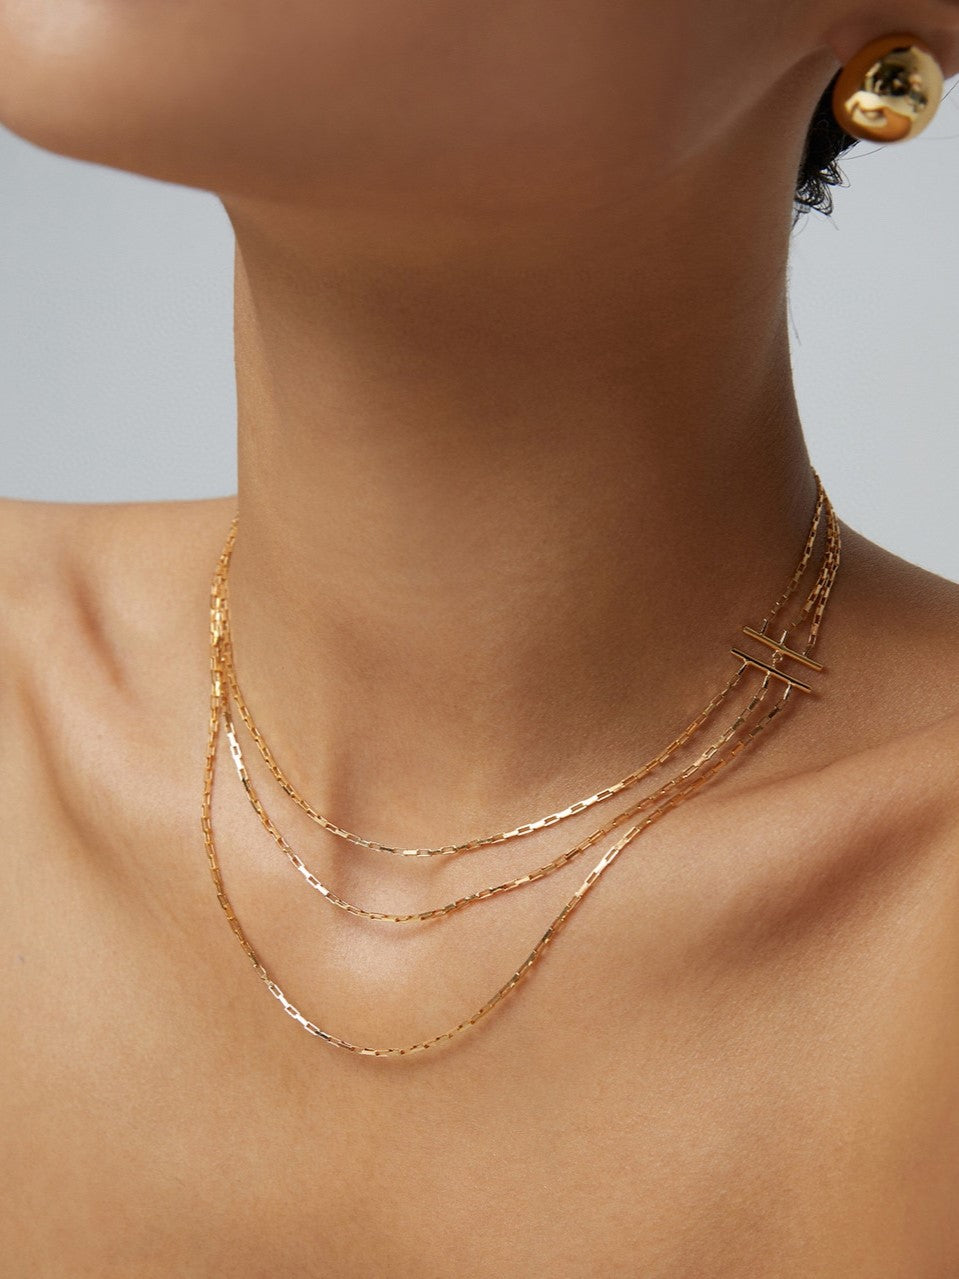 Simple sterling silver chain, three-layer necklace